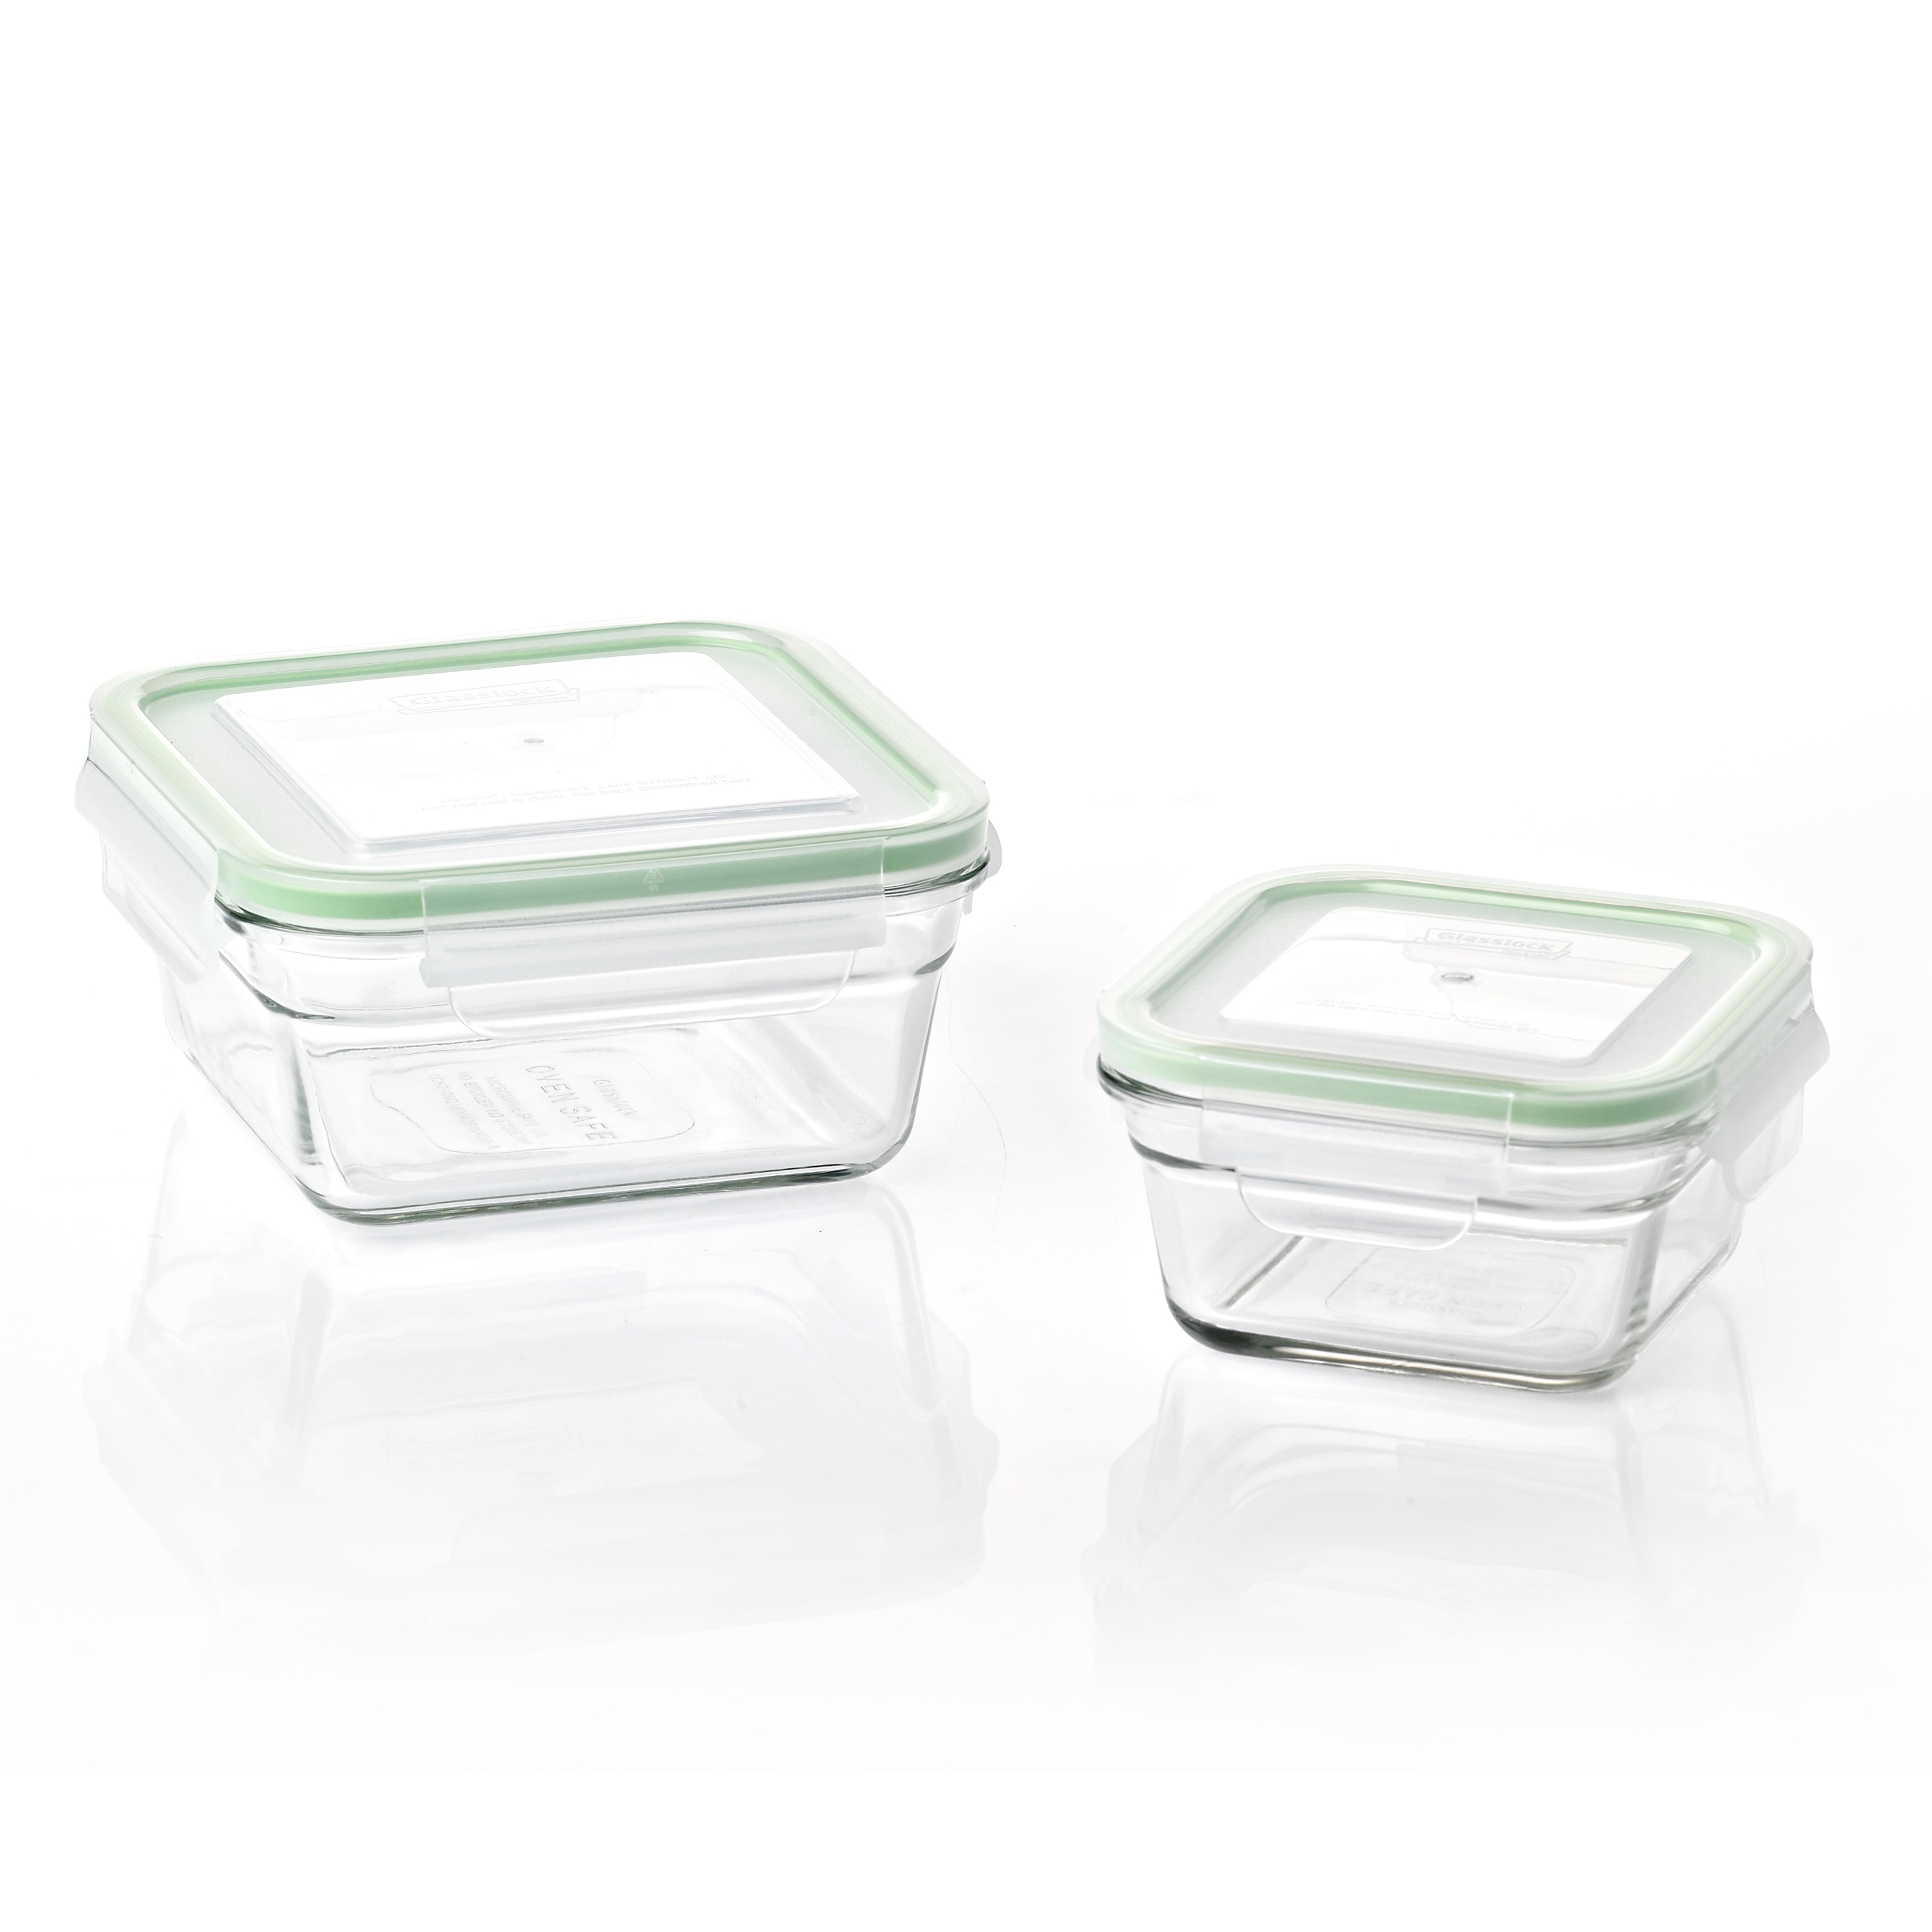 Glasslock Oven and Microwave Safe Glass Food Storage Containers 18 Piece Set